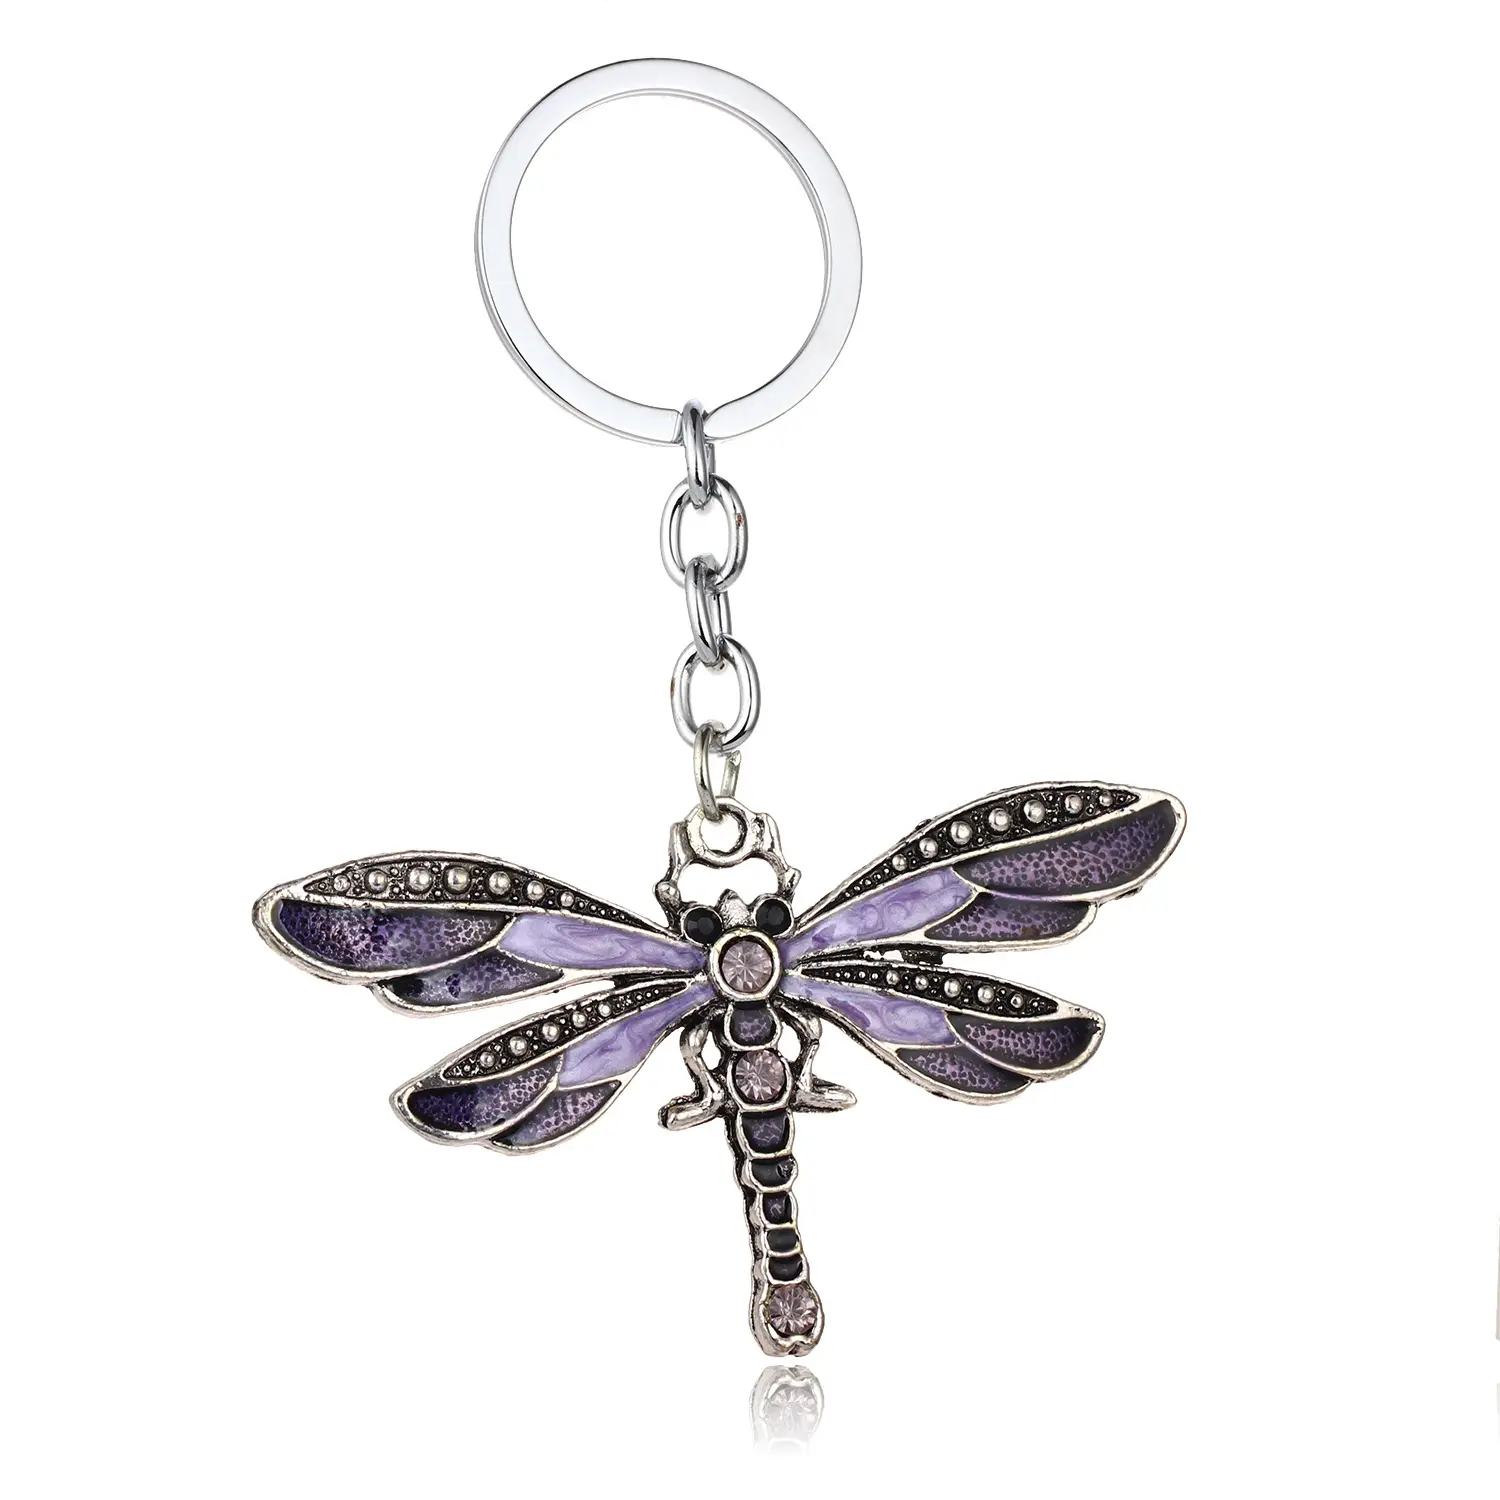 Lilangda 2023 Creative Inlaid Dragonfly Key Ring Jewelry Gifts Sublimation Crystal Keychain Enamel Pendant Dragonfly Charms